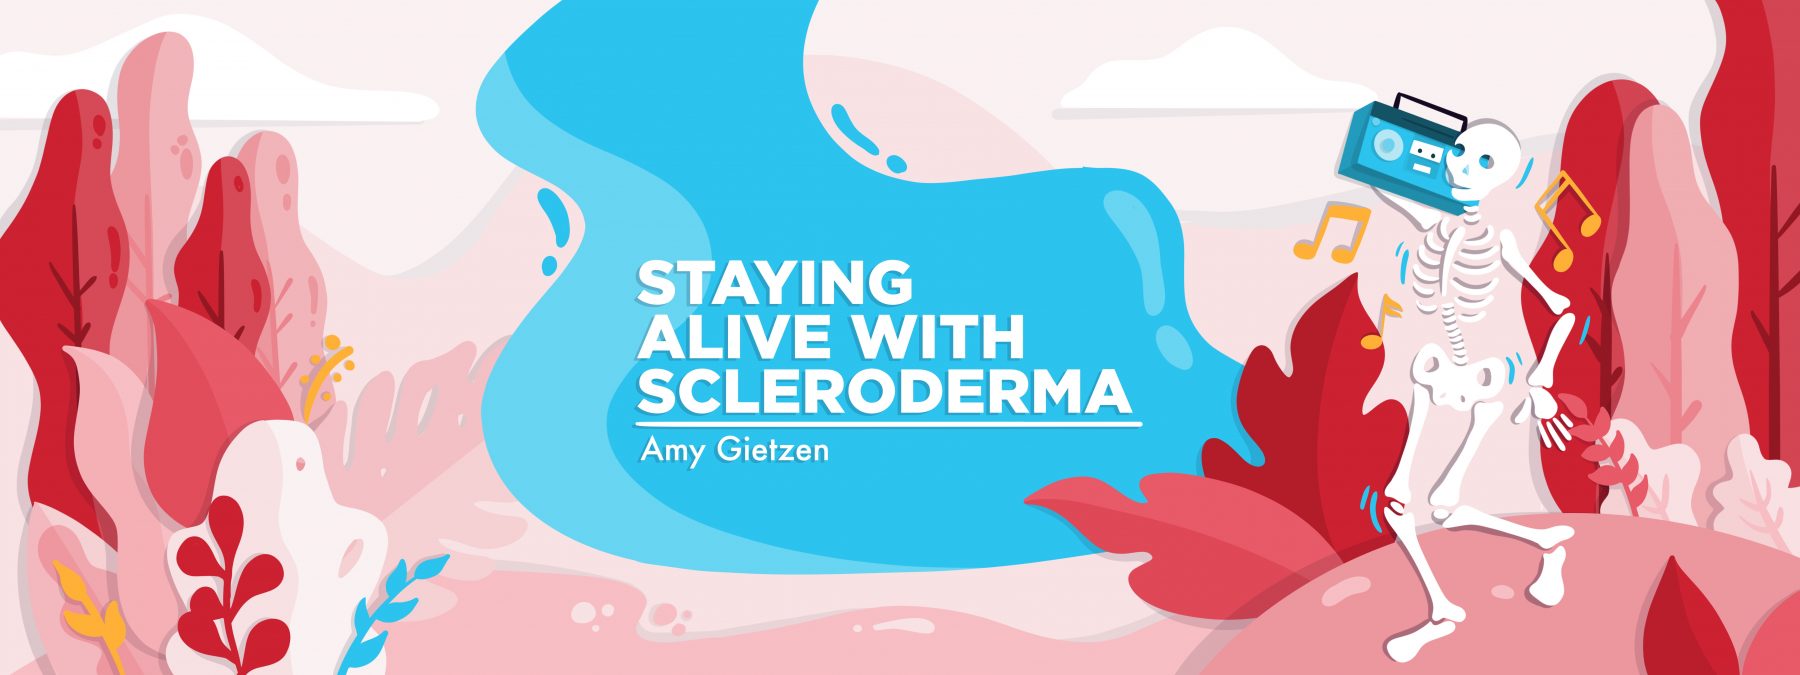 sibling | Scleroderma News | diagnosis | banner image for 